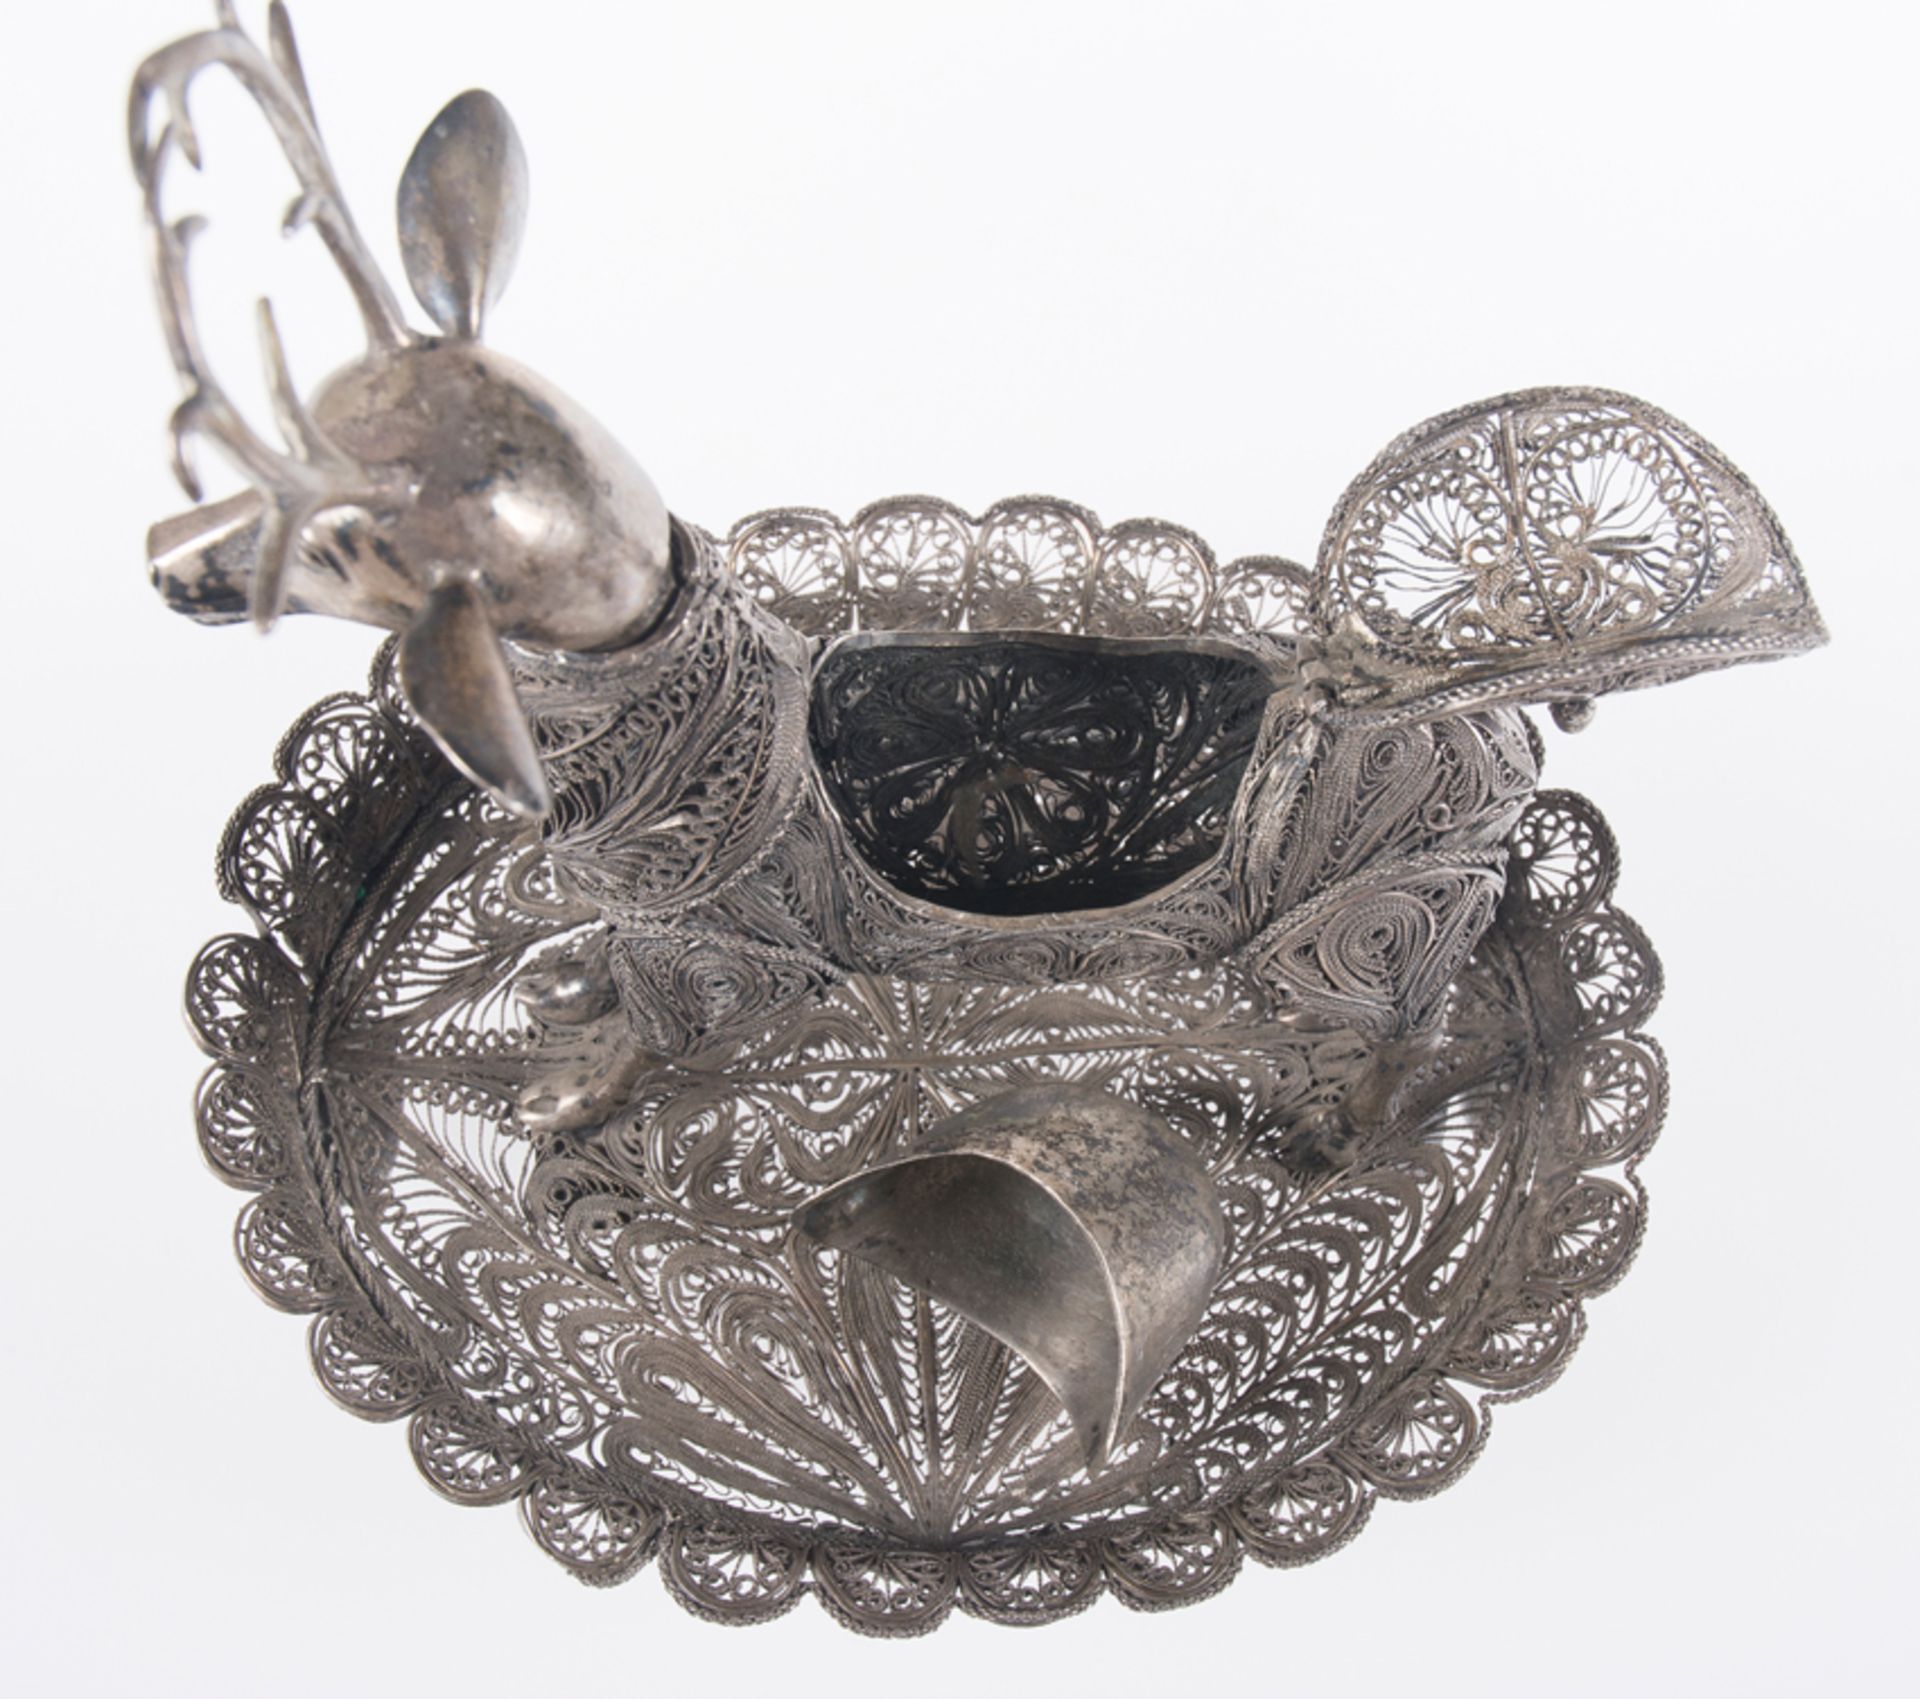 "Sahumador". Deer-shaped, silver filigree incense burner in chased and embossed cast silver. Colonia - Bild 9 aus 10